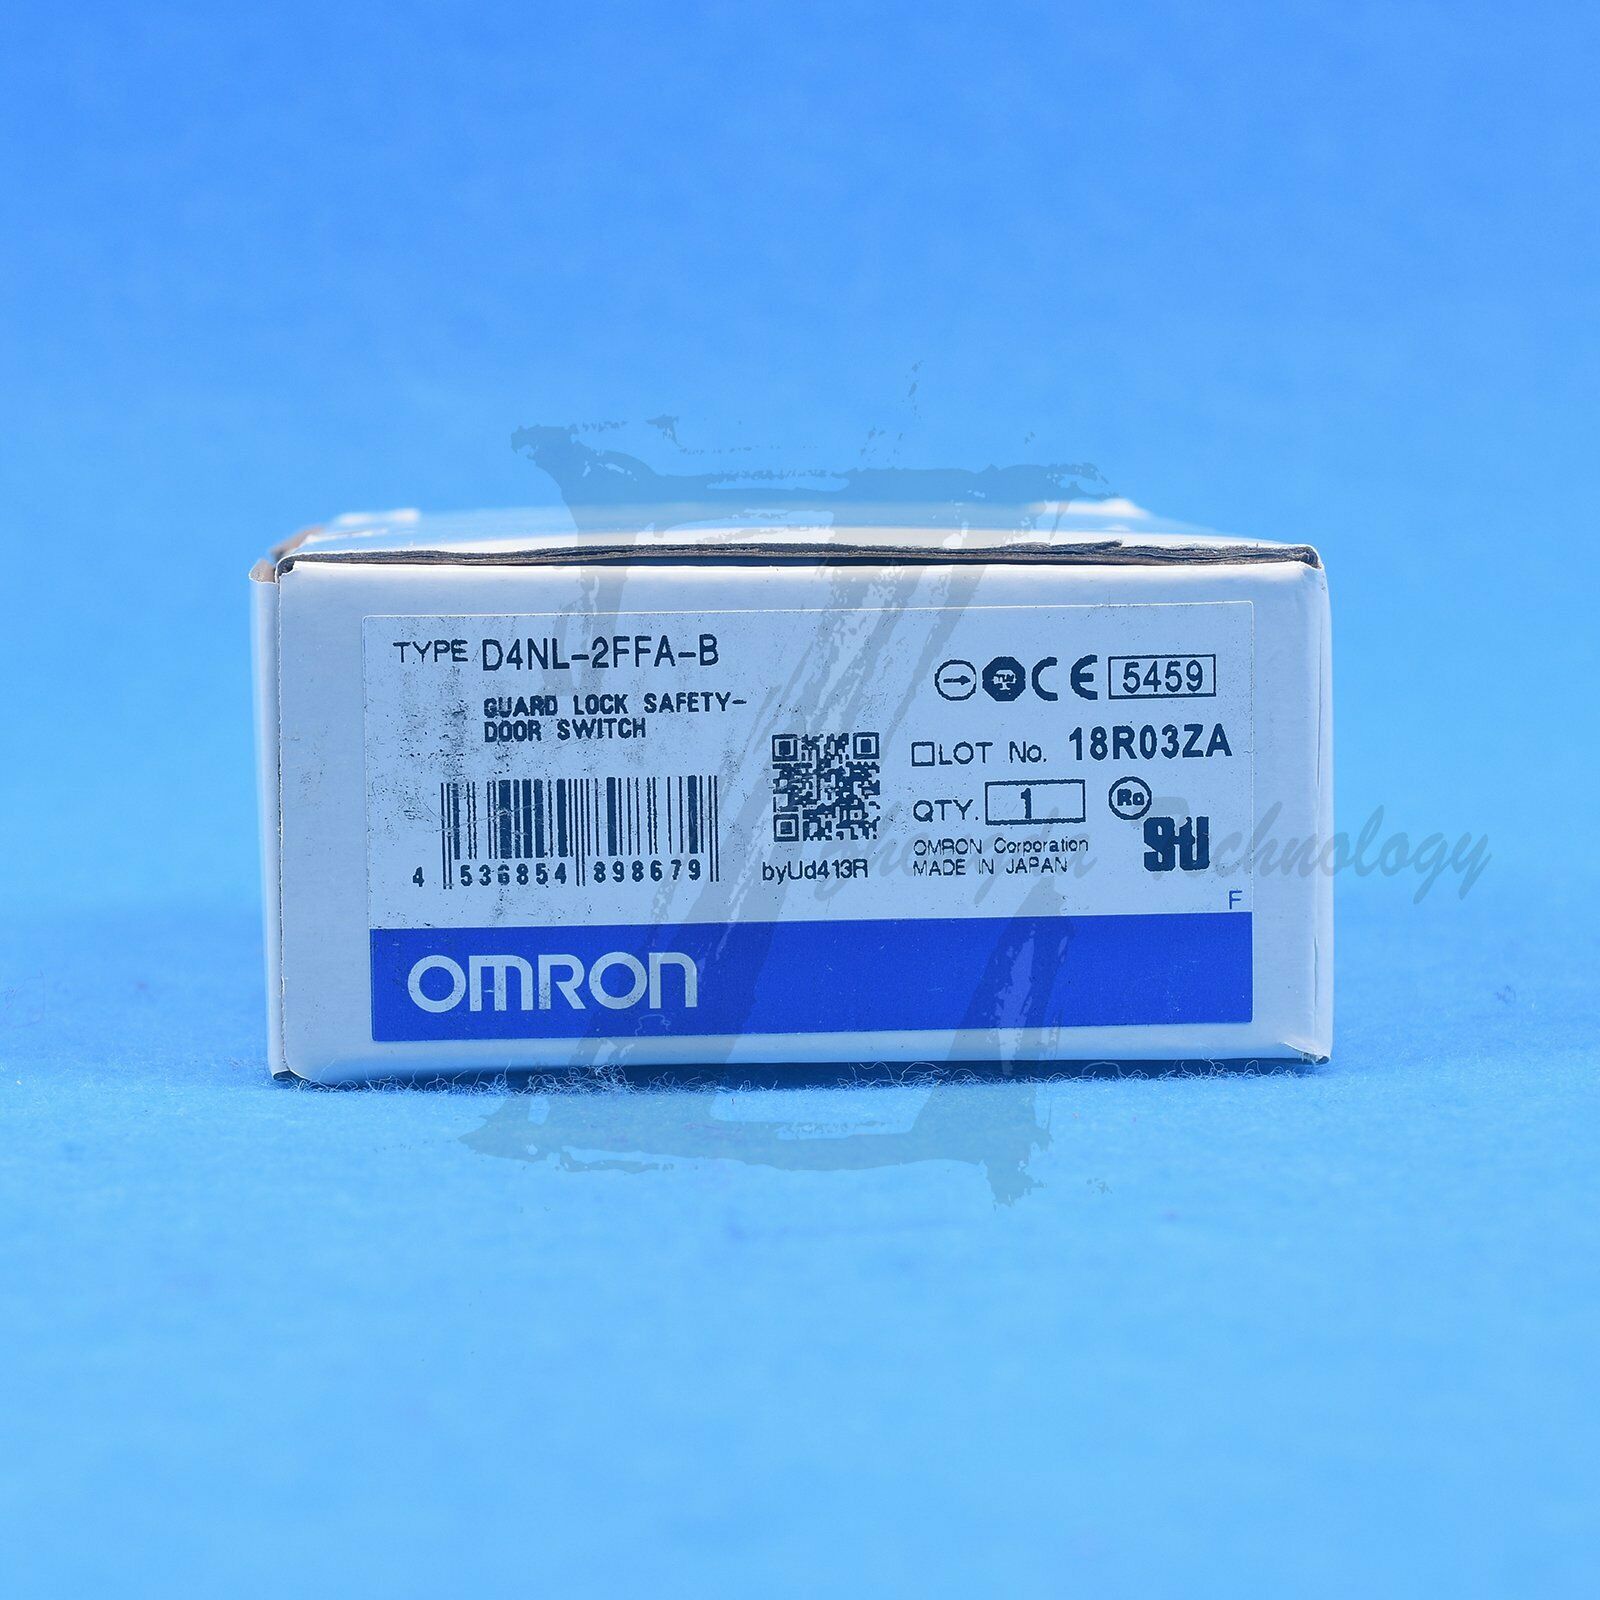 1pc New Omron Guard Lock Safety Door Switch D4NL-2FFA-B One year warranty KOEED 101-200, 80%, import_2020_10_10_031751, Omron, Other